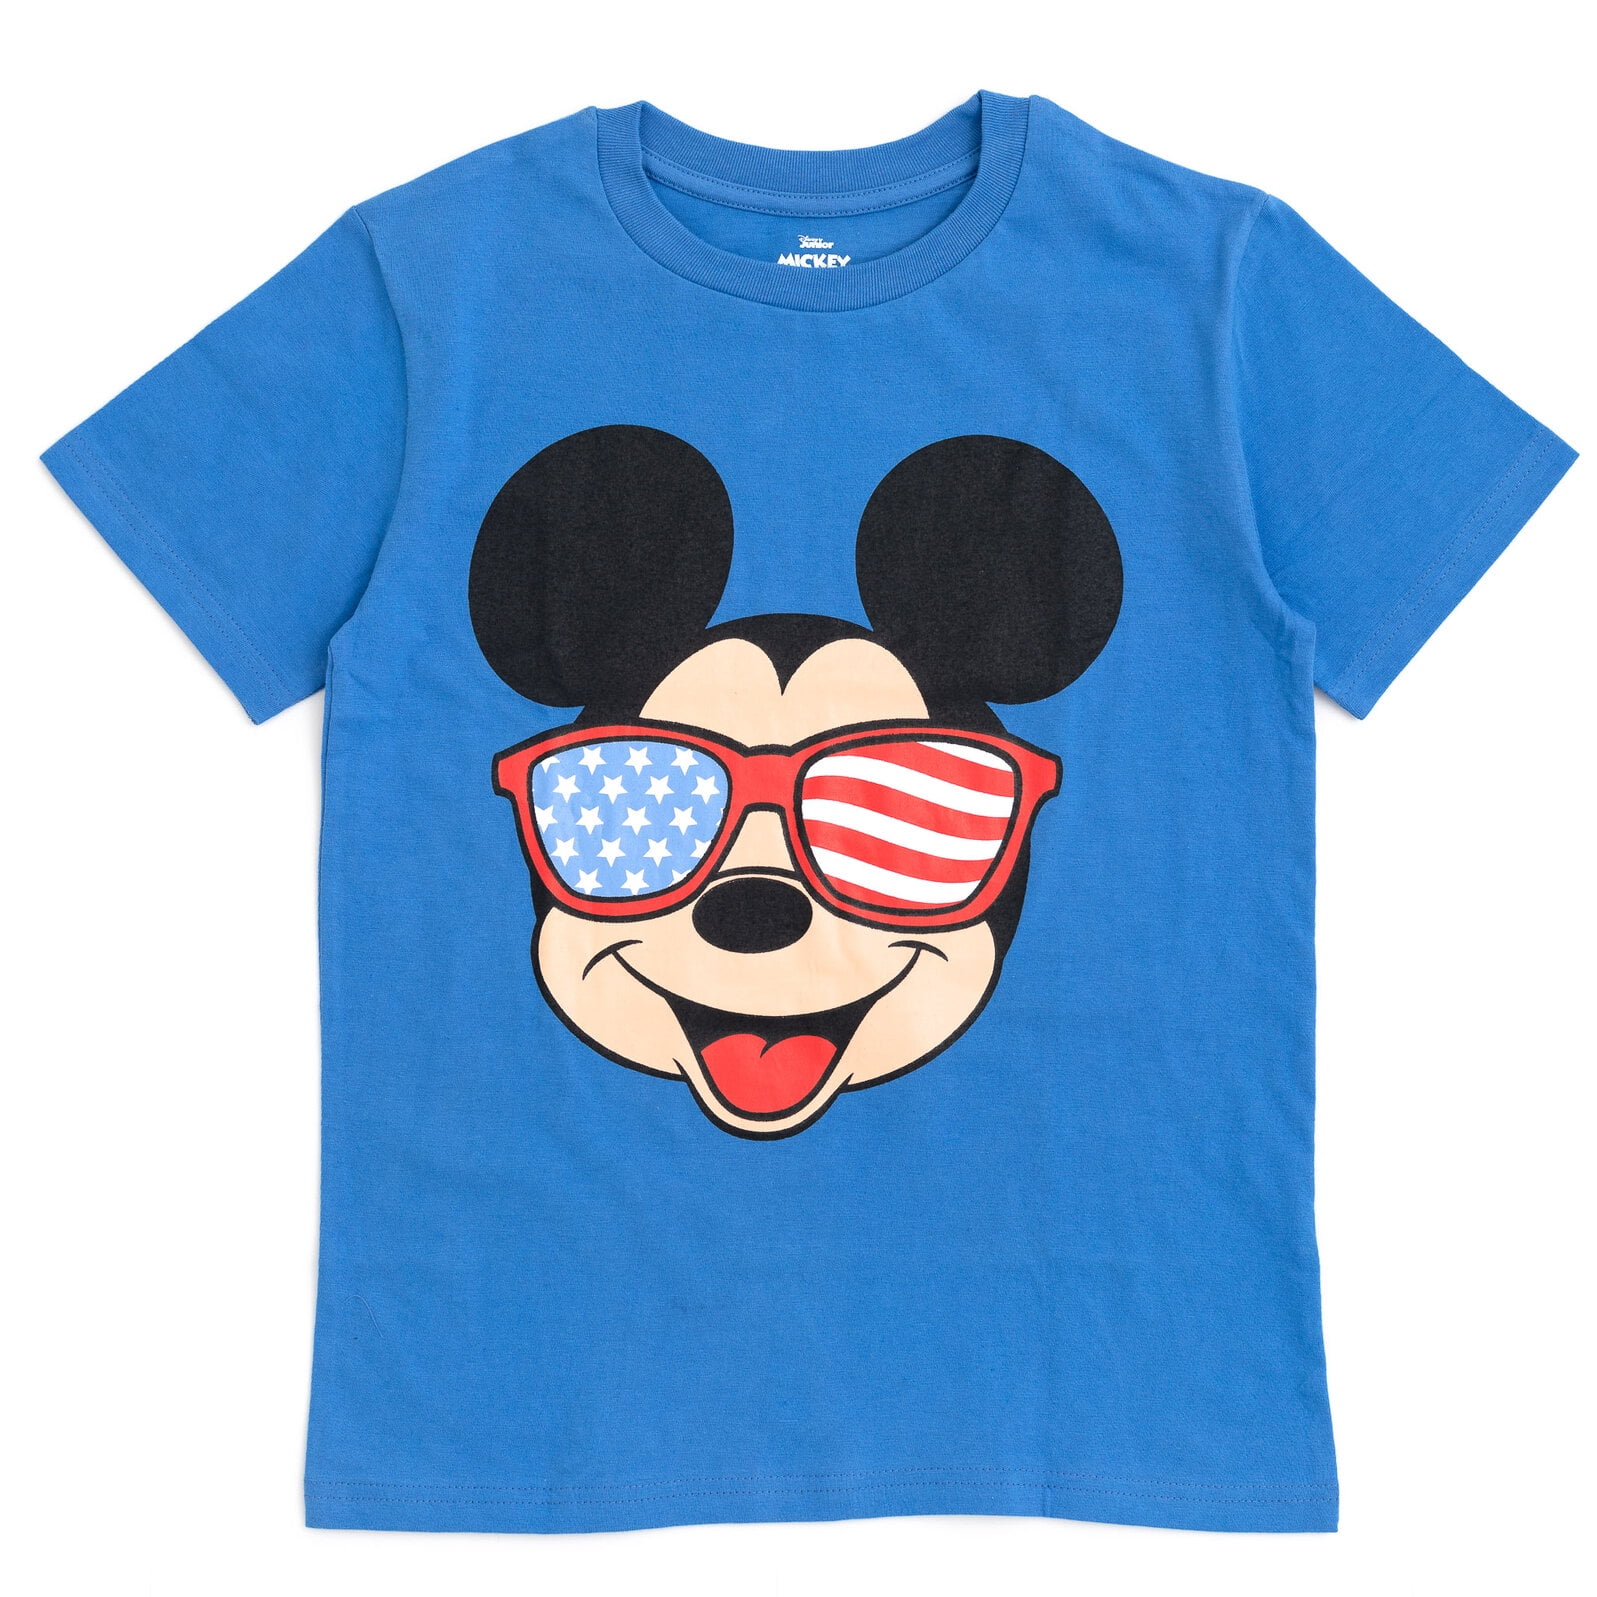 Uniqlo Boys size 7-8 tshirt blue Disney with Mickey Mouse and